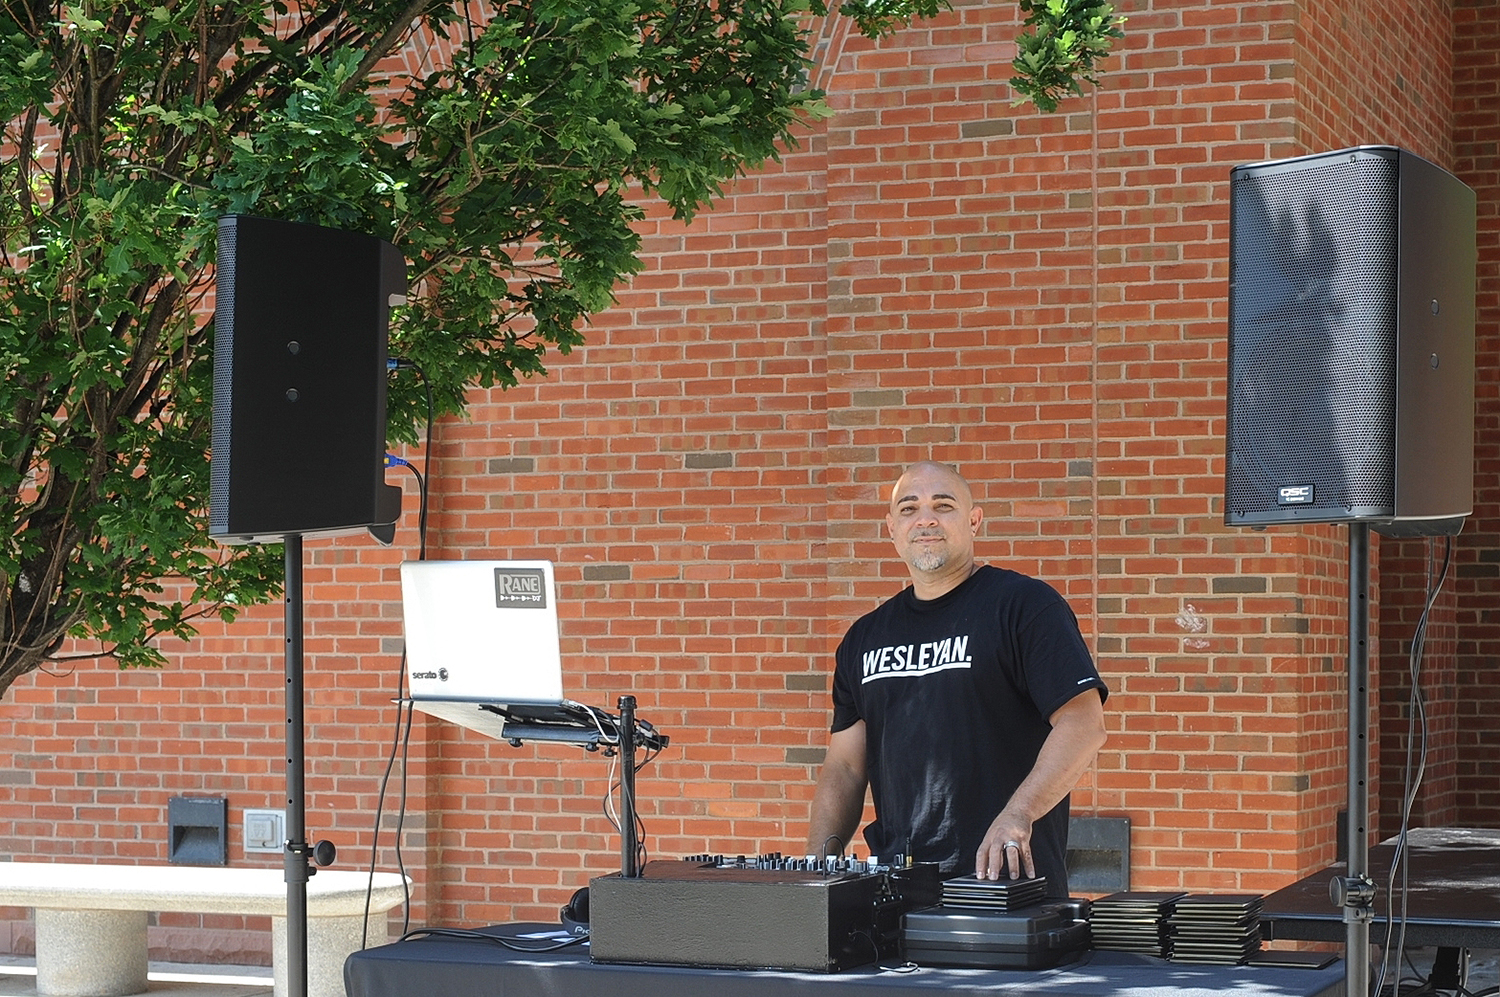 On June 3, Wesleyan's Human Resources Department held an all faculty and staff Ice Cream Social in the Usdan Courtyard.